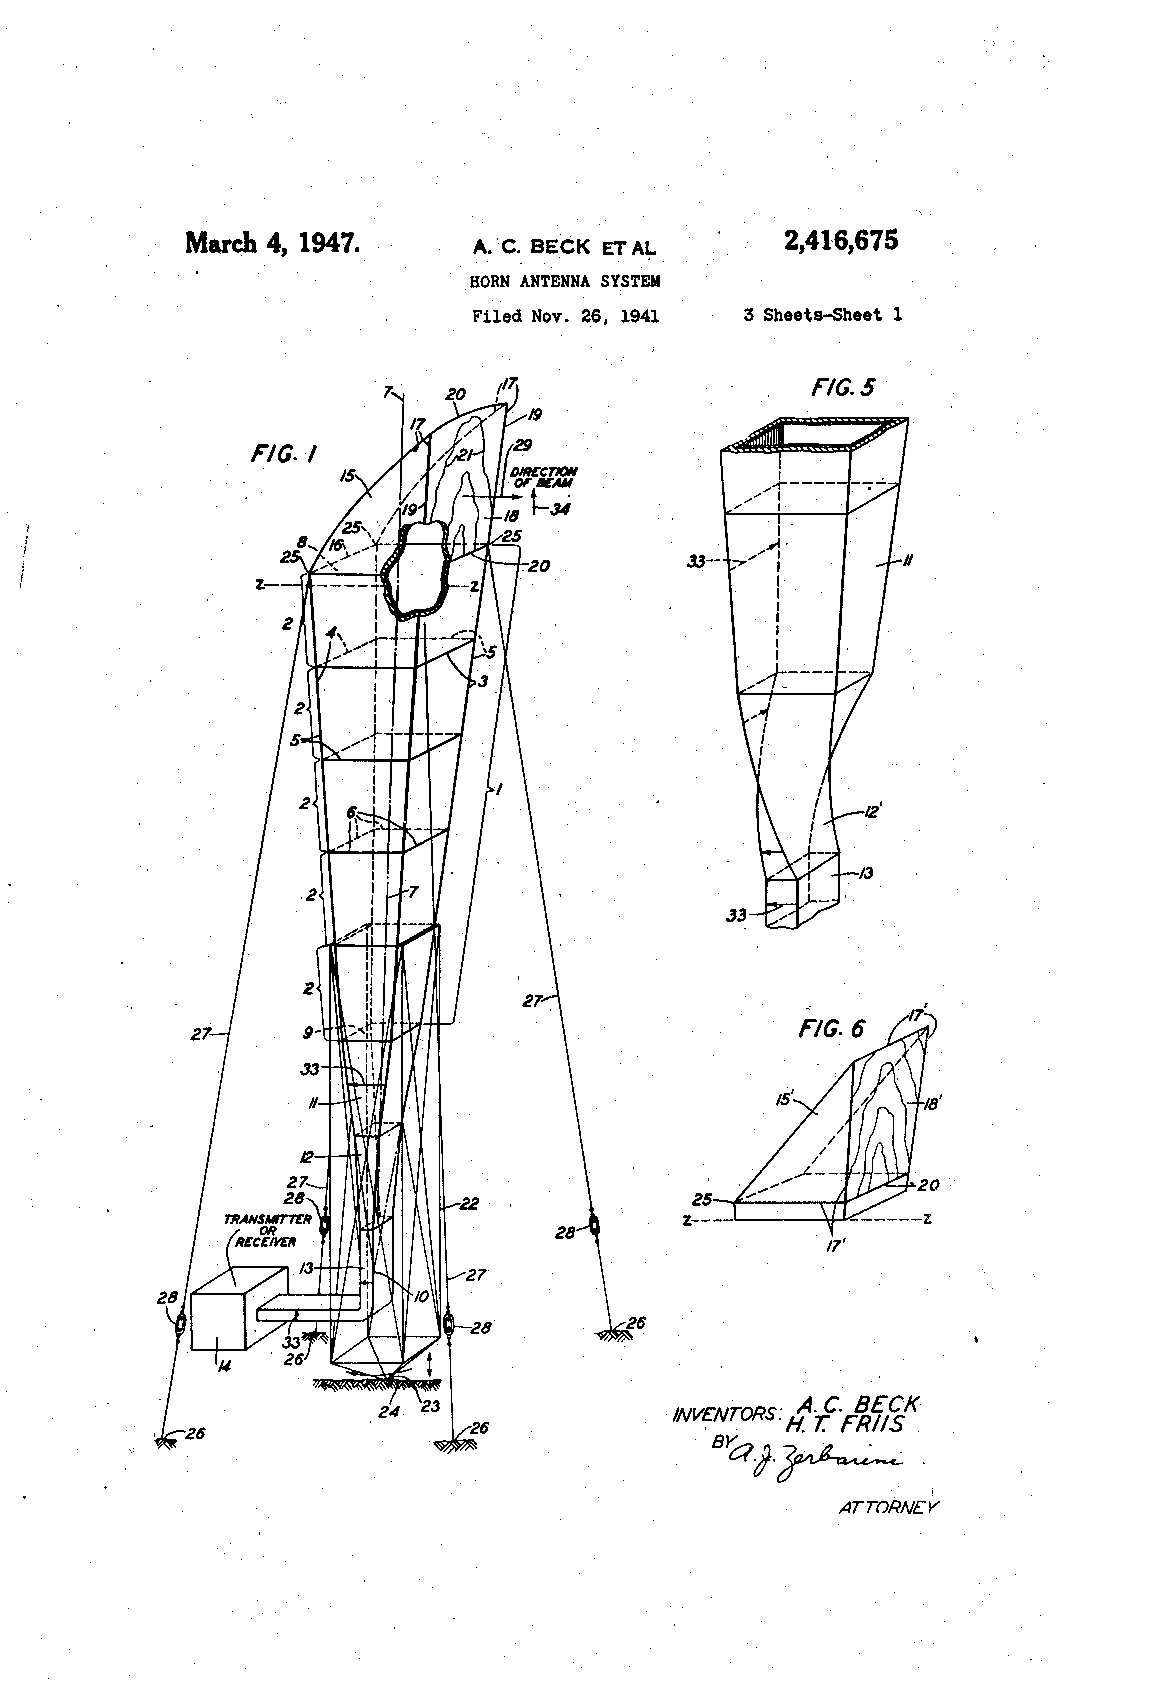 Patent drawing for horn-reflector antenna